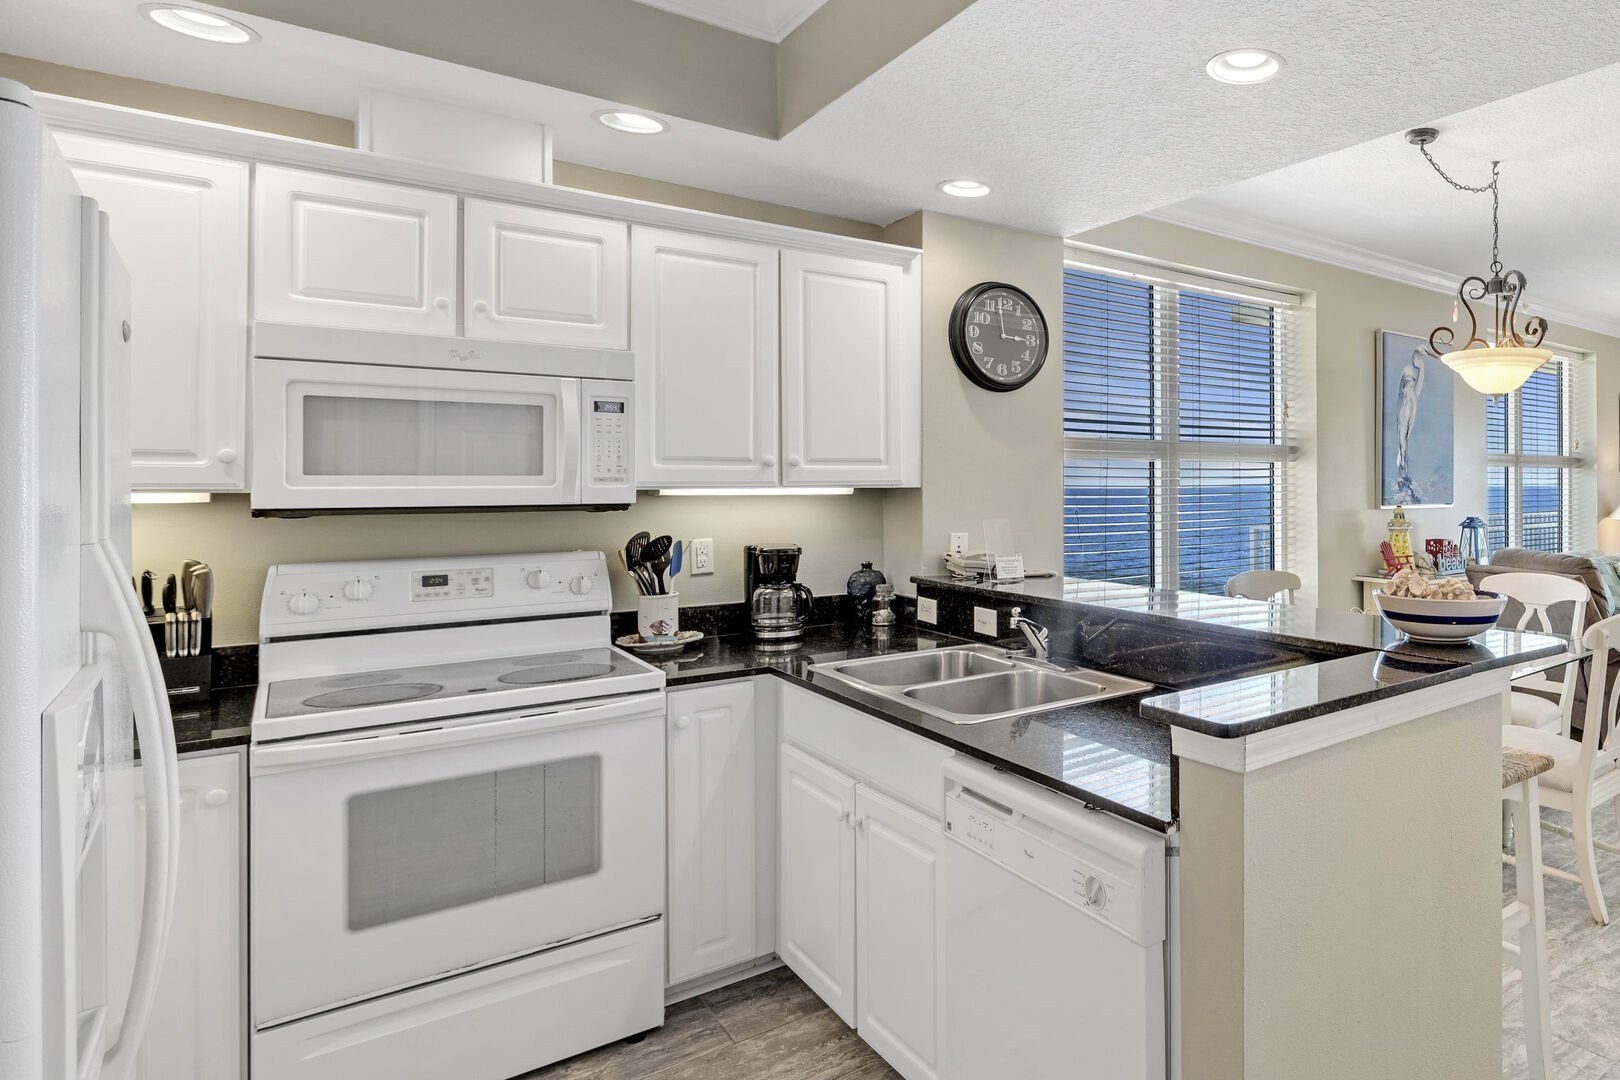 Full Size, Equipped, Spacious Kitchen overlooking the Gulf